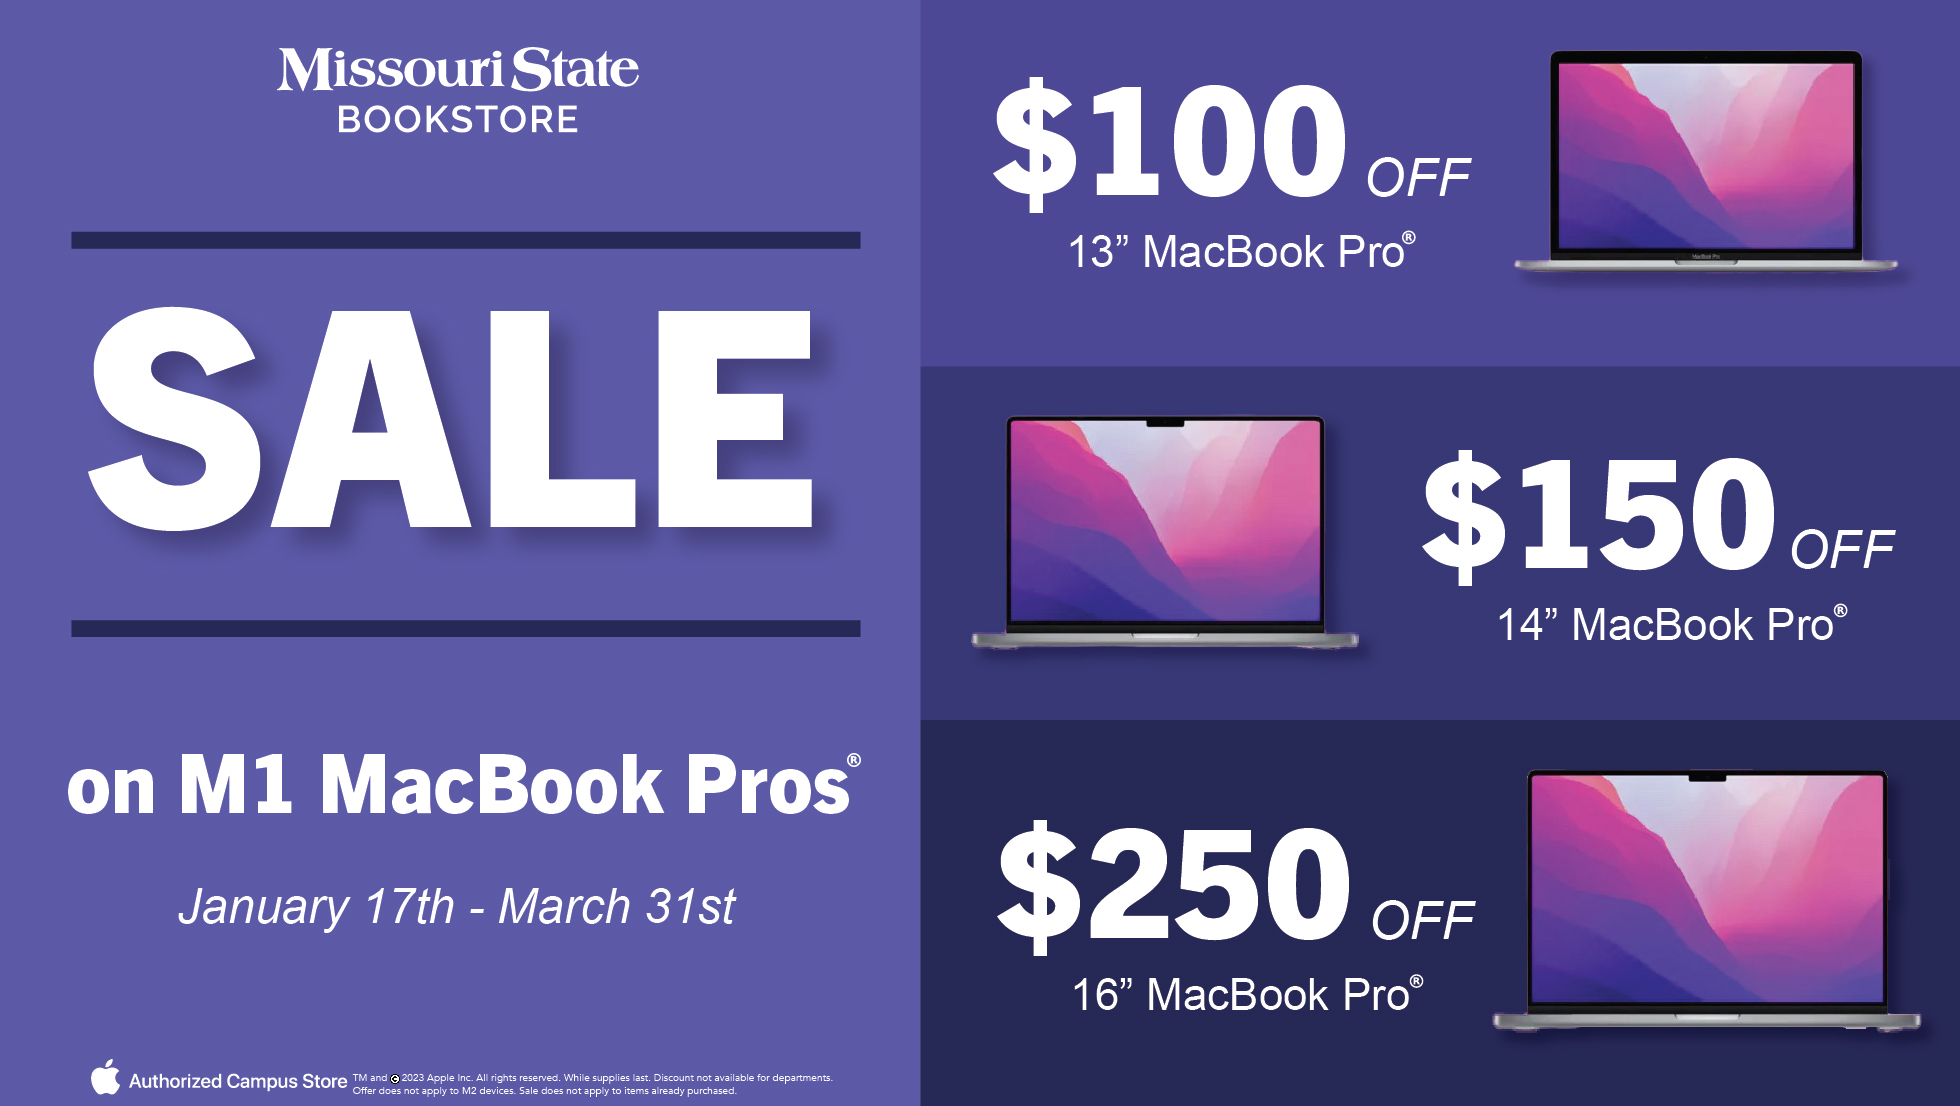 Sale on MacBook Pros. $100 off 13 inch, $150 off 14 inch, and $250 off 16 inch M1 MacBook Pros. Sale lasts until March 31.